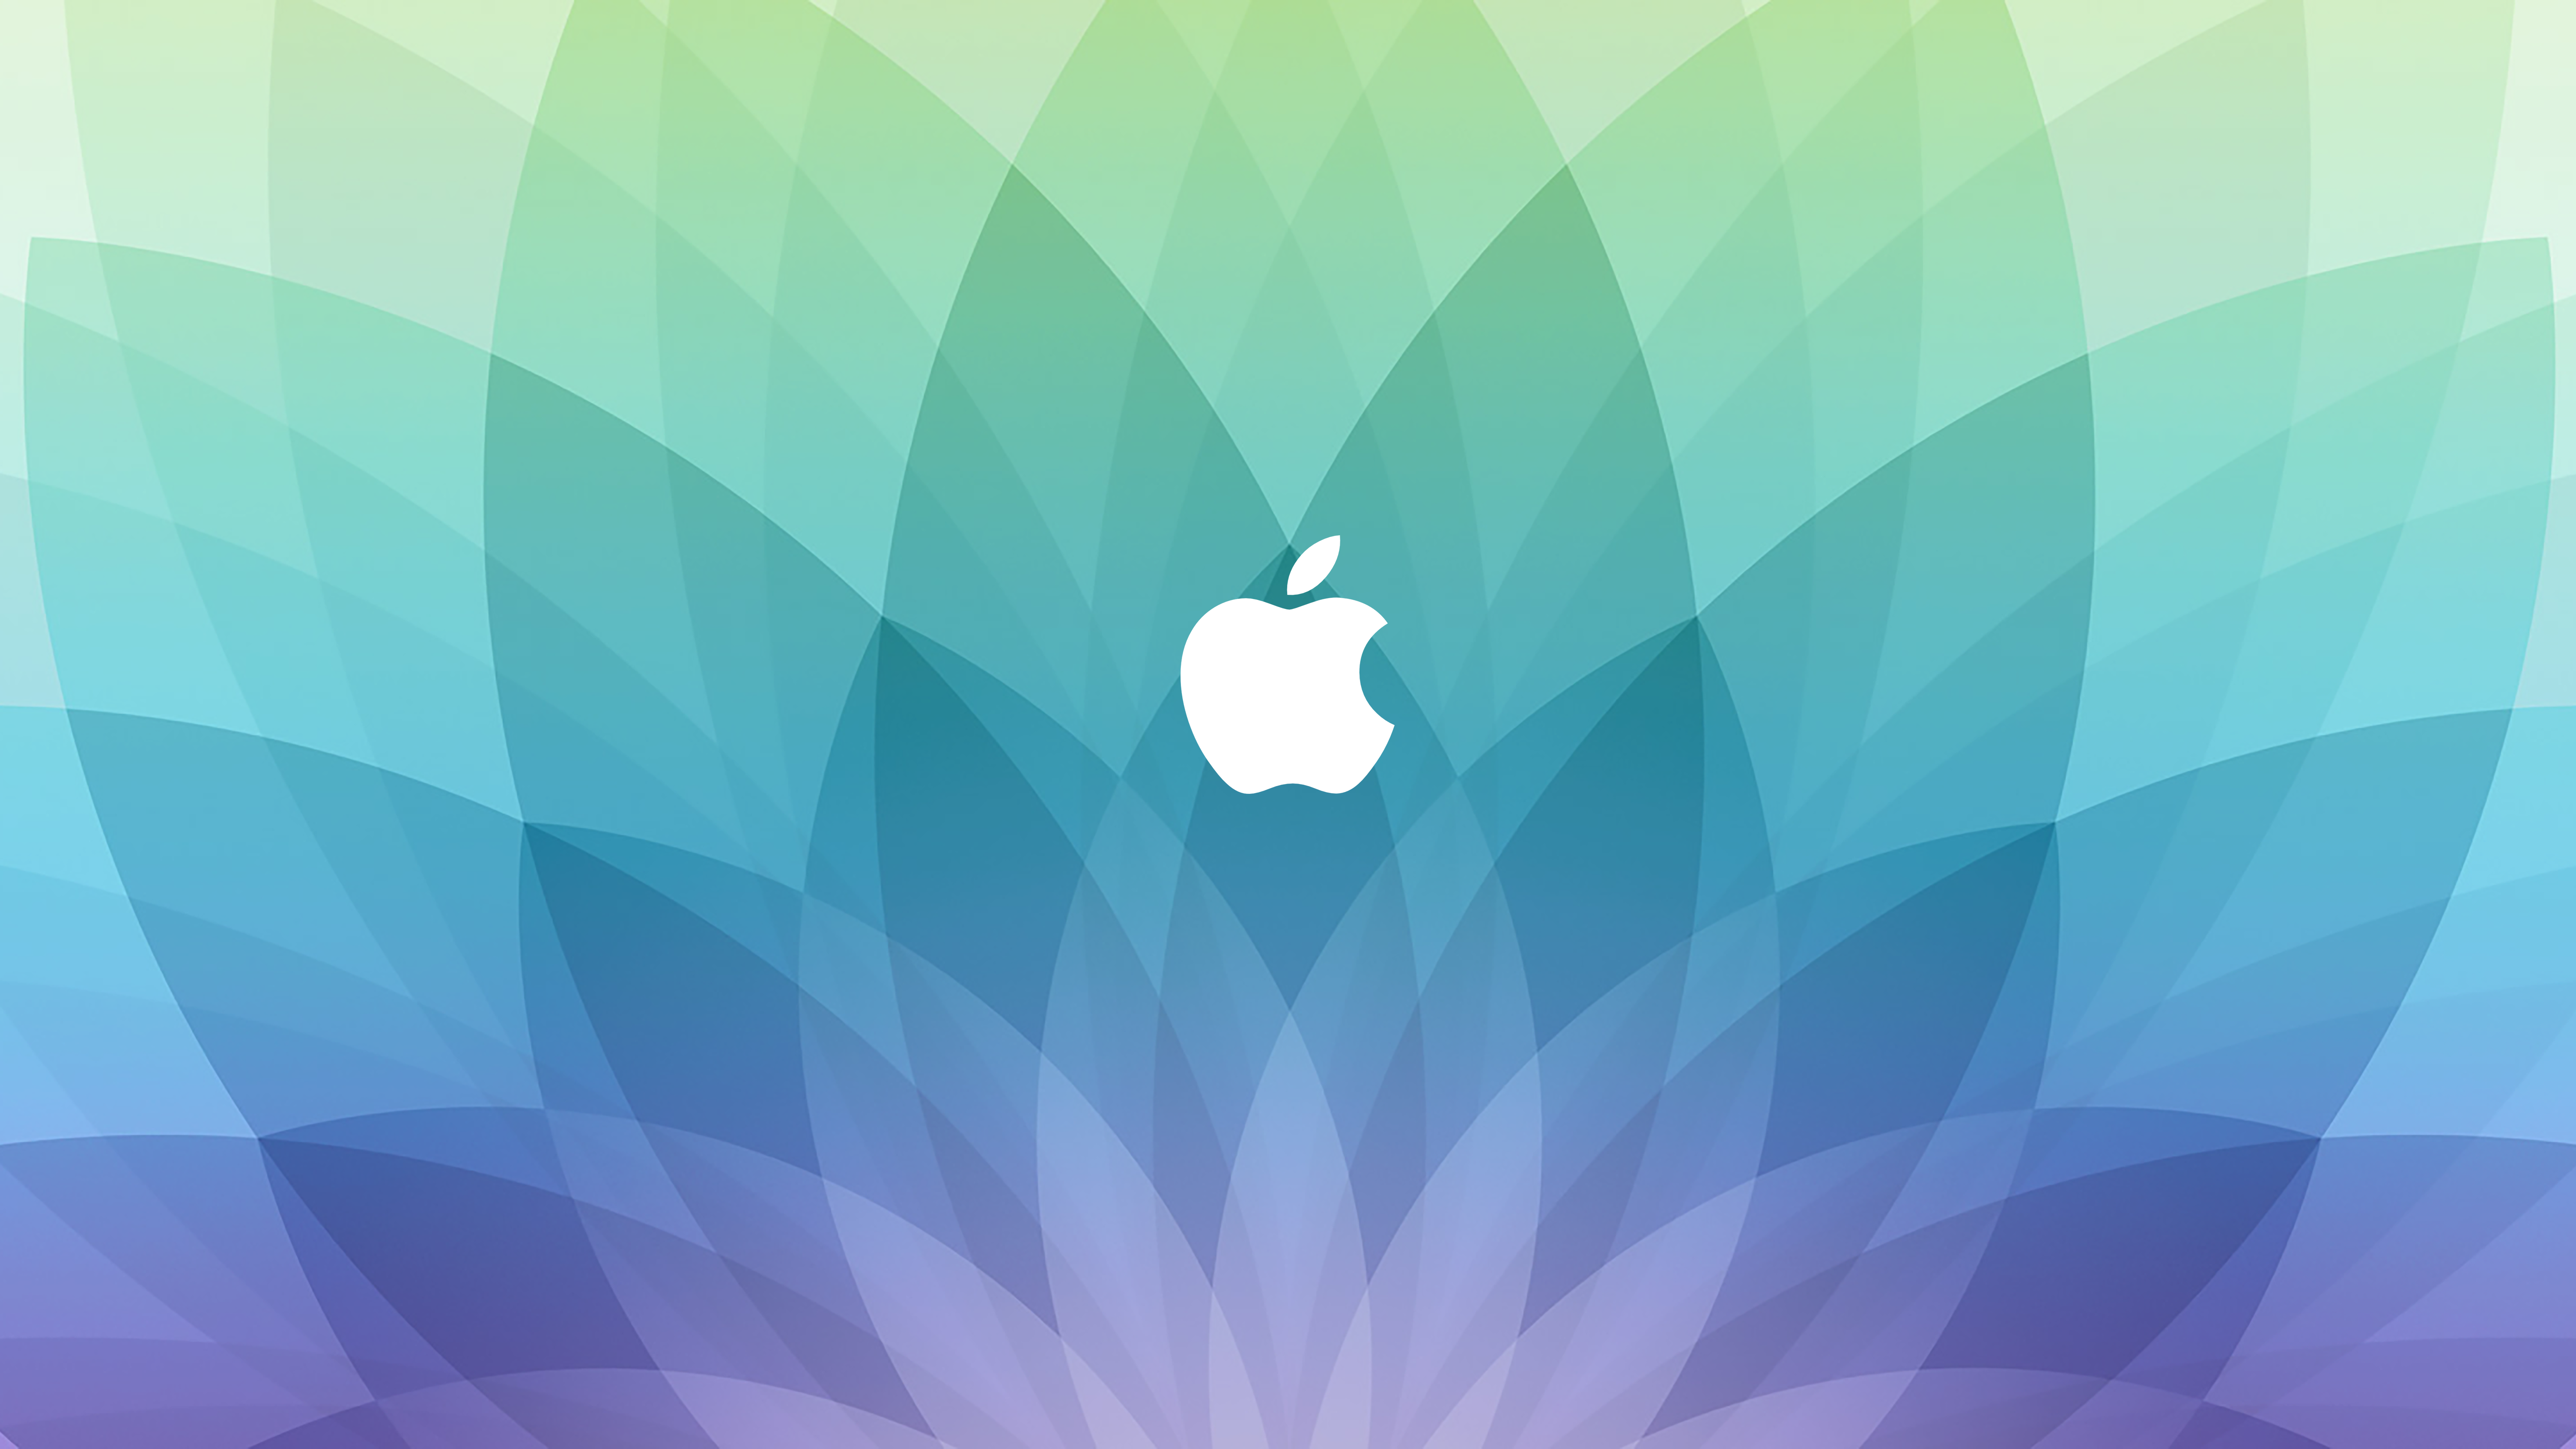 Download These Beautiful Apple 'Spring Forward' Event Wallpapers ...